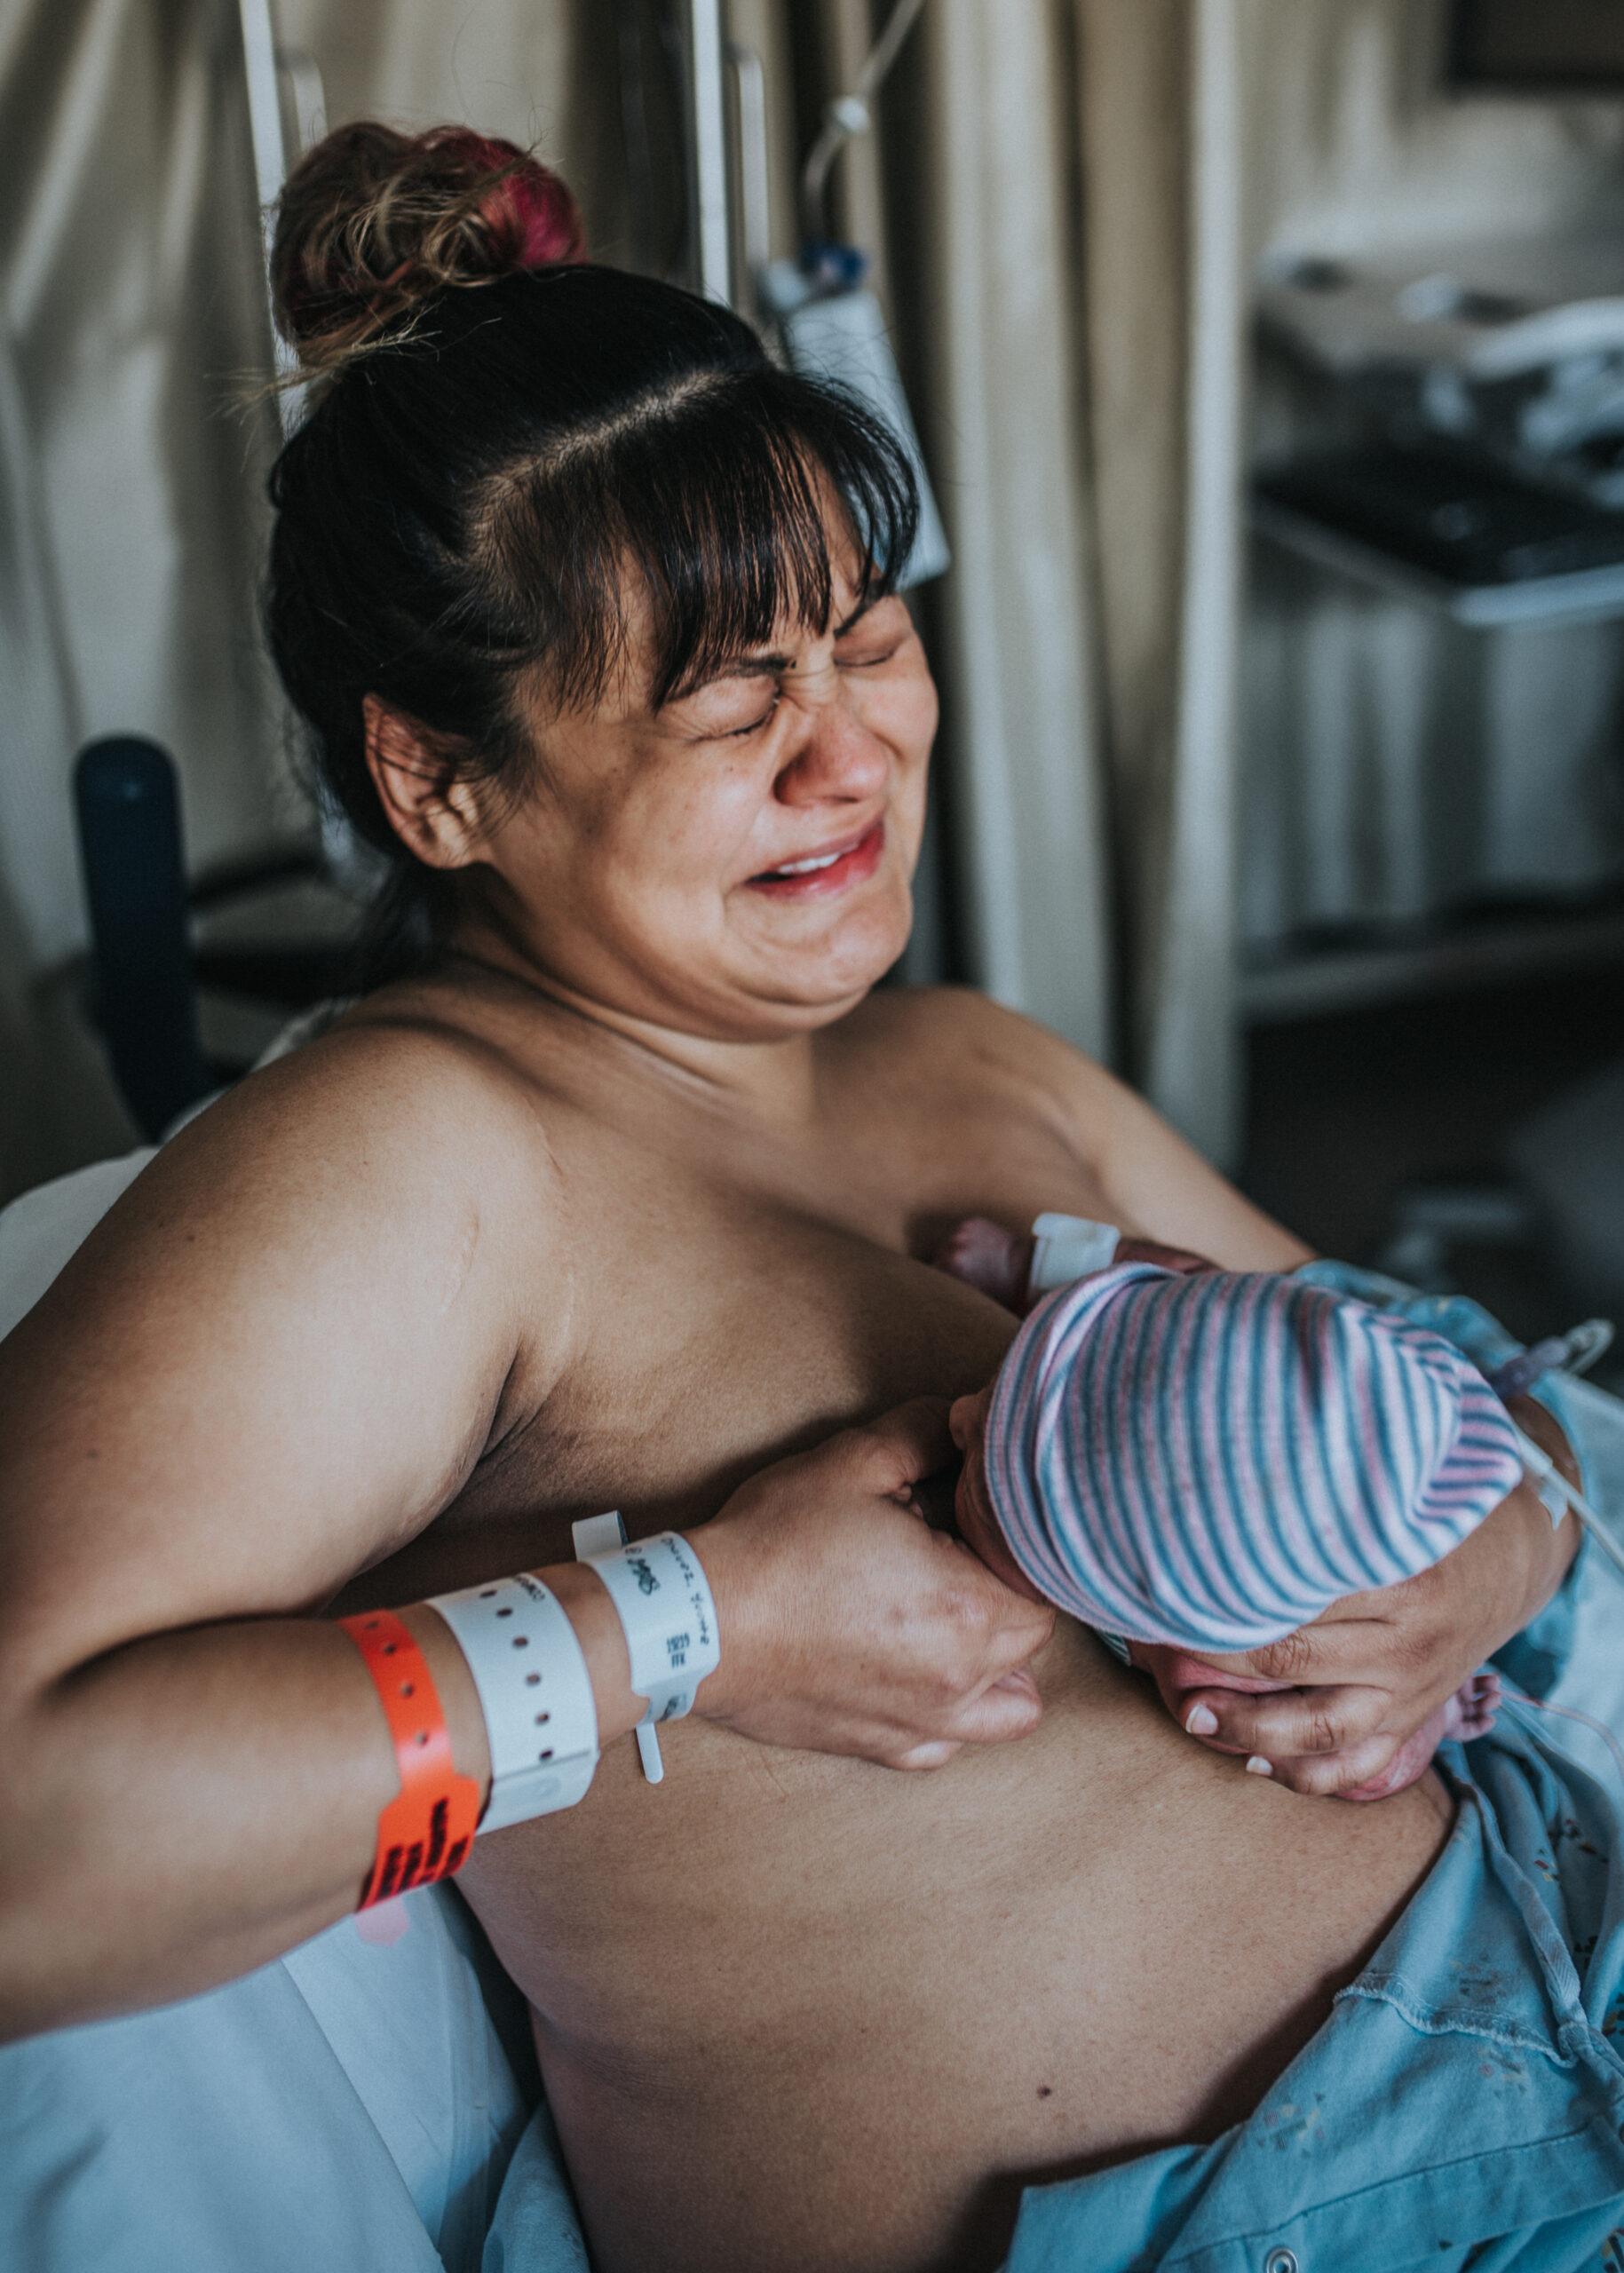 Image of birth photography example: crying woman as she latches her baby to her chest for the first time. This image was portrayed in the Interview with KCRW with Los Angeles birth photographer Diana Hinek for #dearbirth